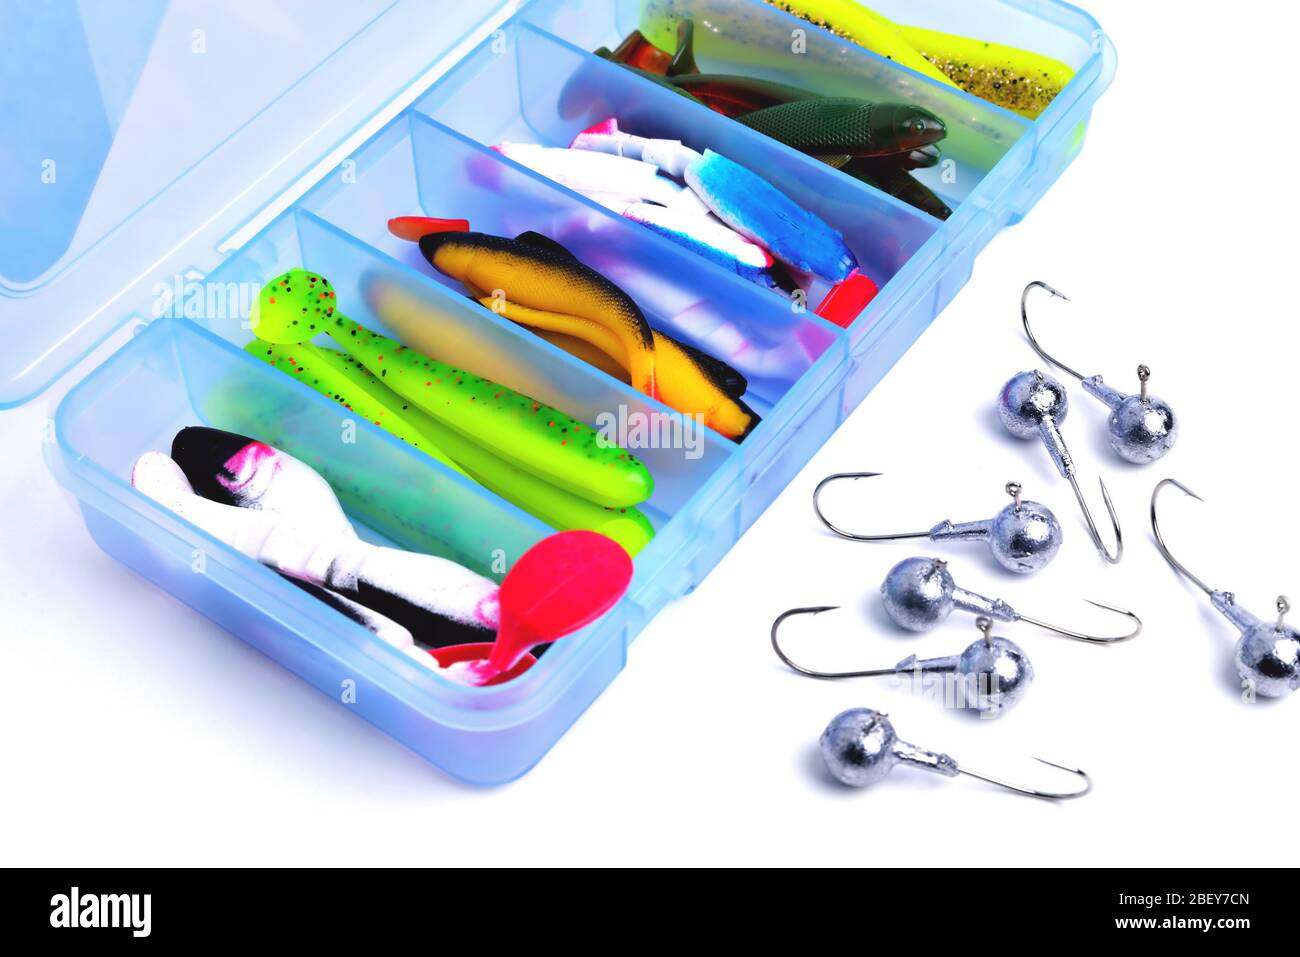 https://c8.alamy.com/comp/2BEY7CN/box-for-fishing-accessories-with-silicone-baits-inside-jig-hooks-on-a-white-background-close-up-2BEY7CN.jpg